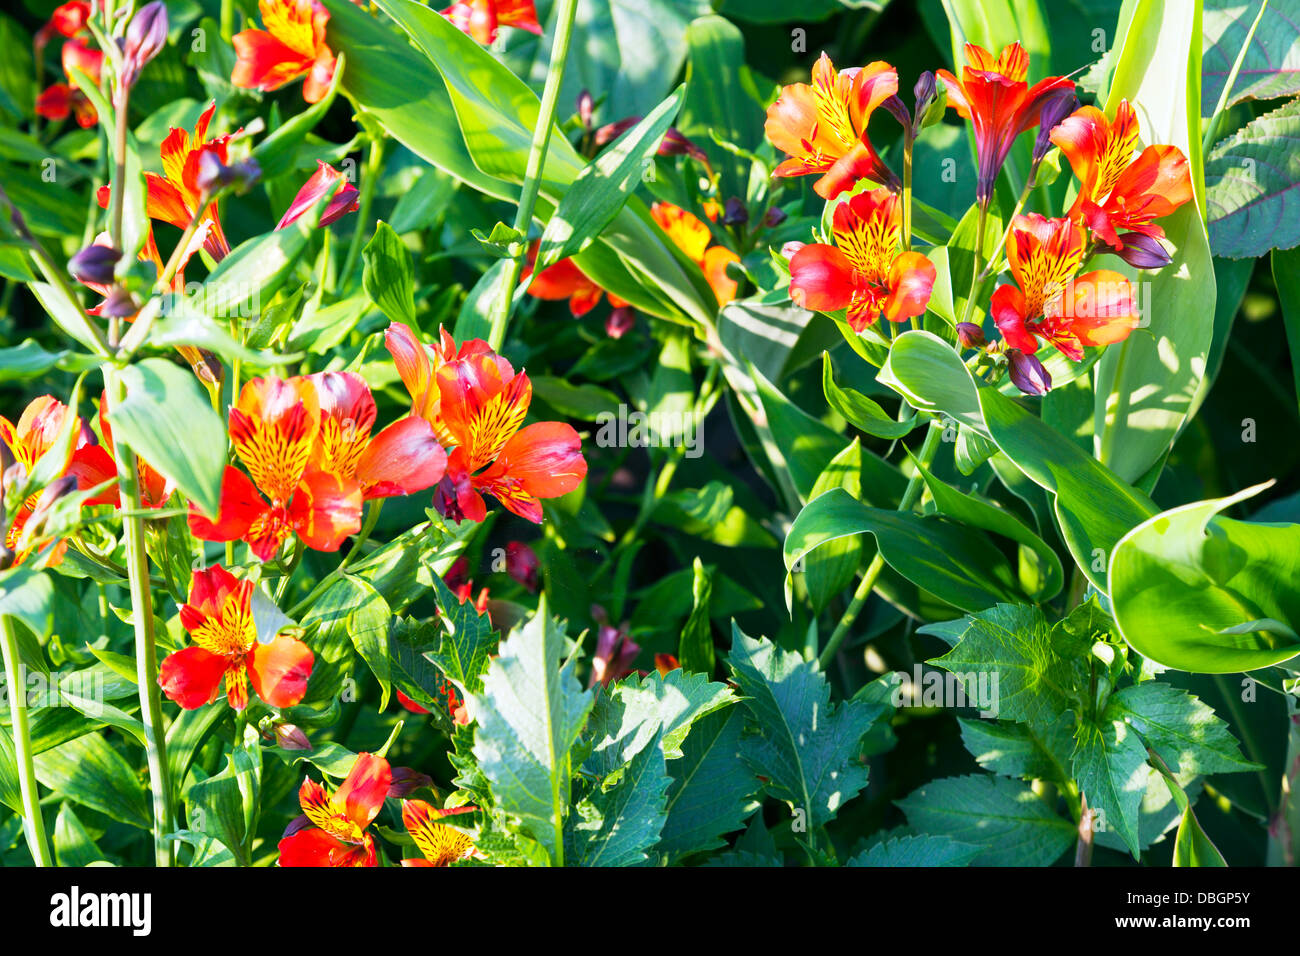 Garden plants flowers Alstroemeria Peruvian lily or lily of the Incas, is a genus of flowering plants in the family Alstroemeria Stock Photo